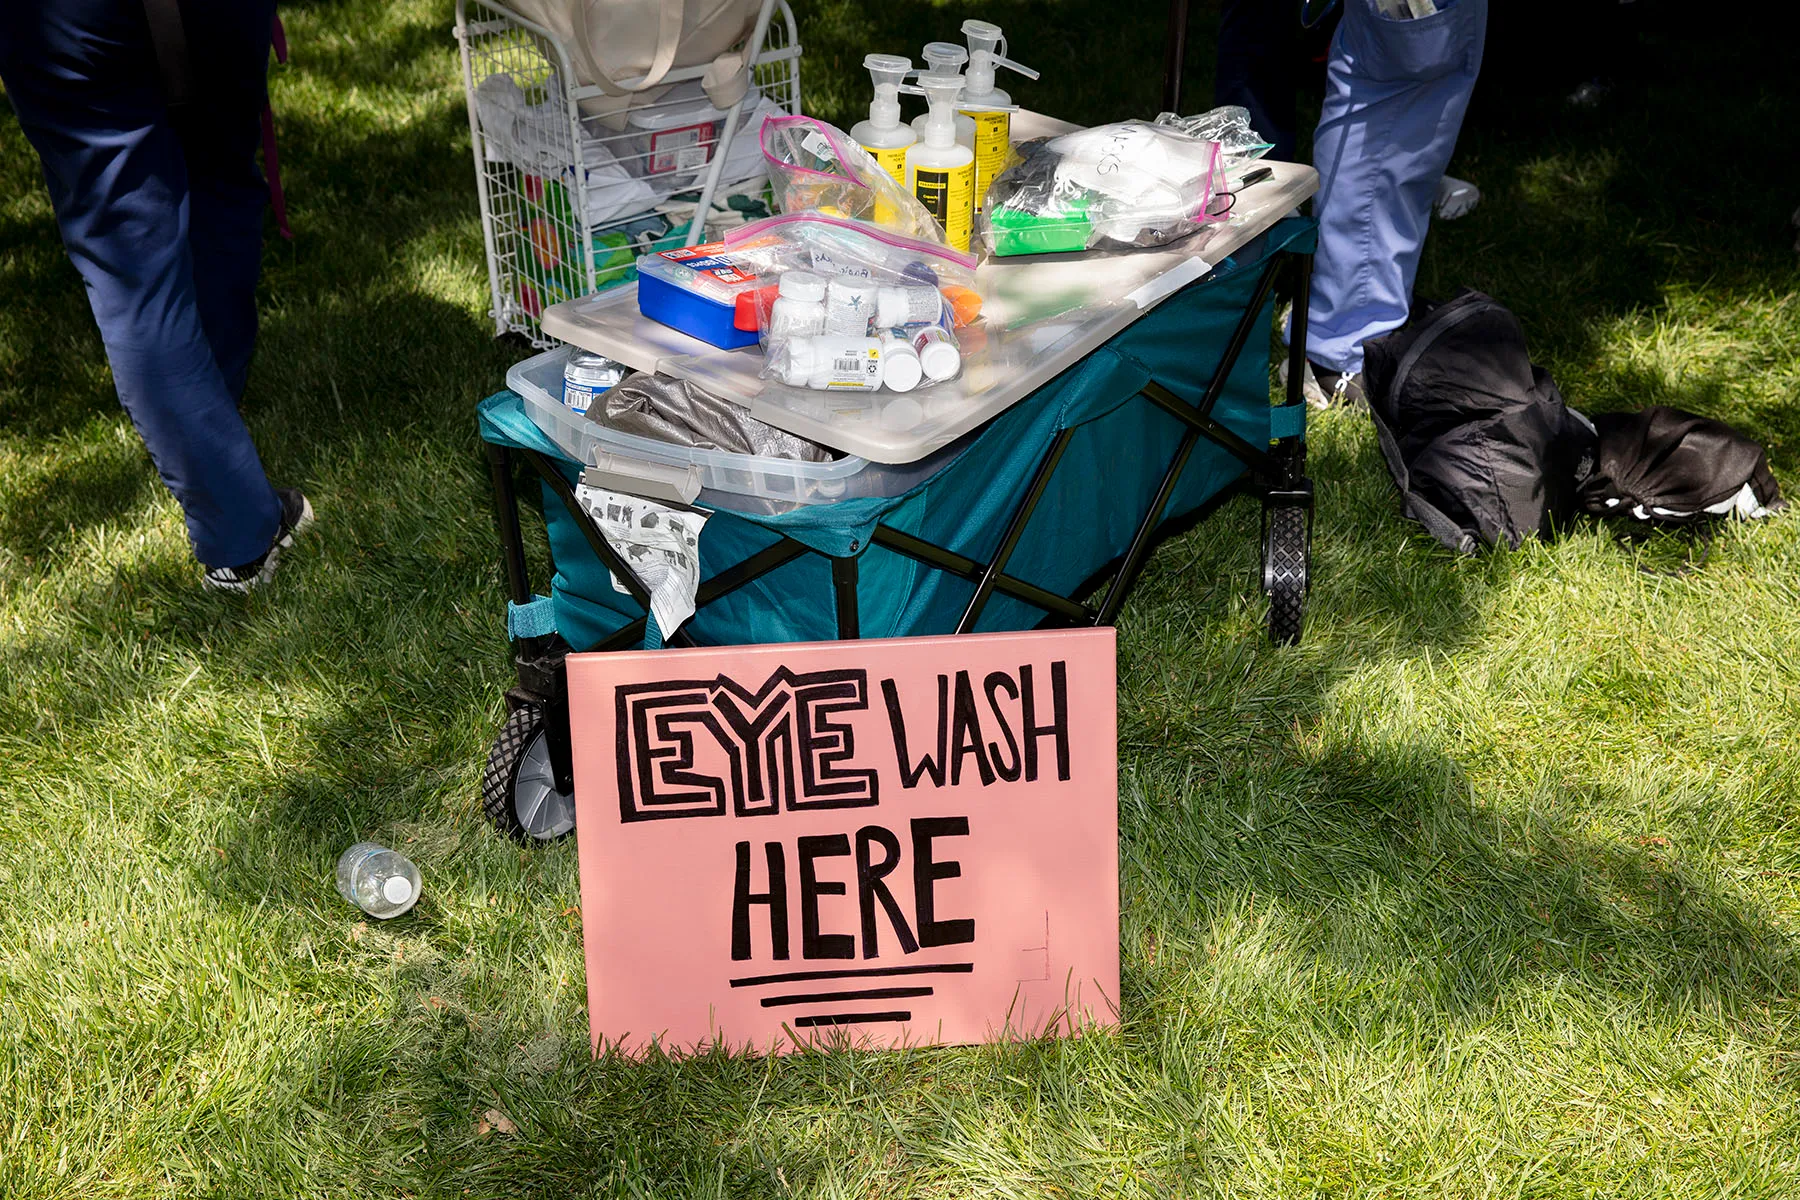 Emory medical school students set up an eye wash and first aid station on the quad at Emory.